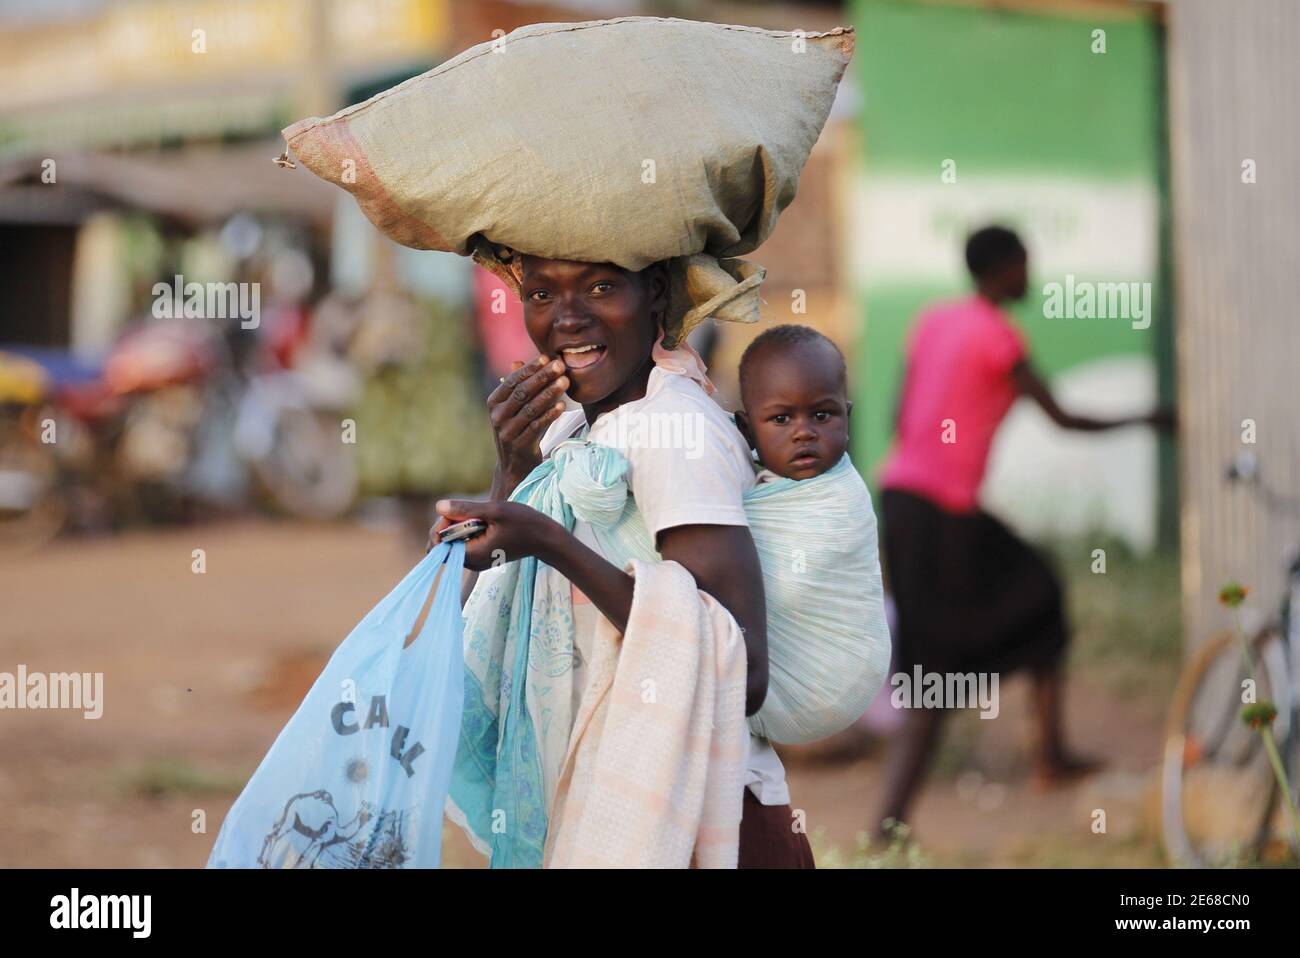 A woman carries a child and a bag on her head within the trading centre of the U.S. President Barack Obama's ancestral village of Nyang'oma Kogelo, west of Kenya's capital Nairobi, July 15, 2015. President Obama visits Kenya and Ethiopia in July, his third major trip to Sub-Saharan Africa after travelling to Ghana in 2009 and to Tanzania, Senegal and South Africa in 2011. He has also visited Egypt, in North Africa, and South Africa for Nelson Mandela's funeral. Obama will be welcomed by a continent that had expected closer attention from a man they claim as their son, a sentiment felt acutely  Stock Photo